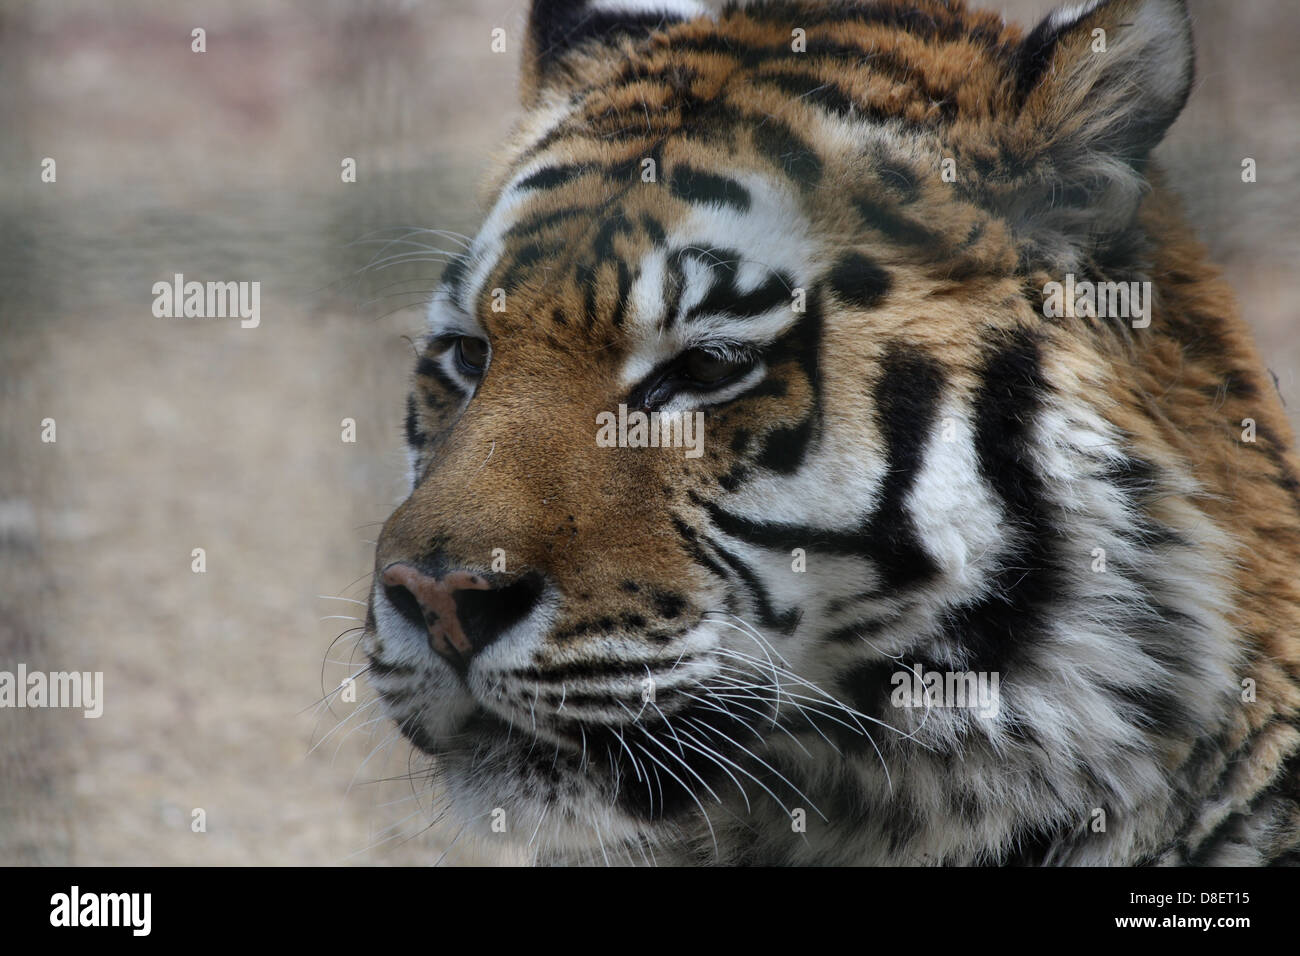 Portrait of a tiger in a zoo enclosure. Stock Photo